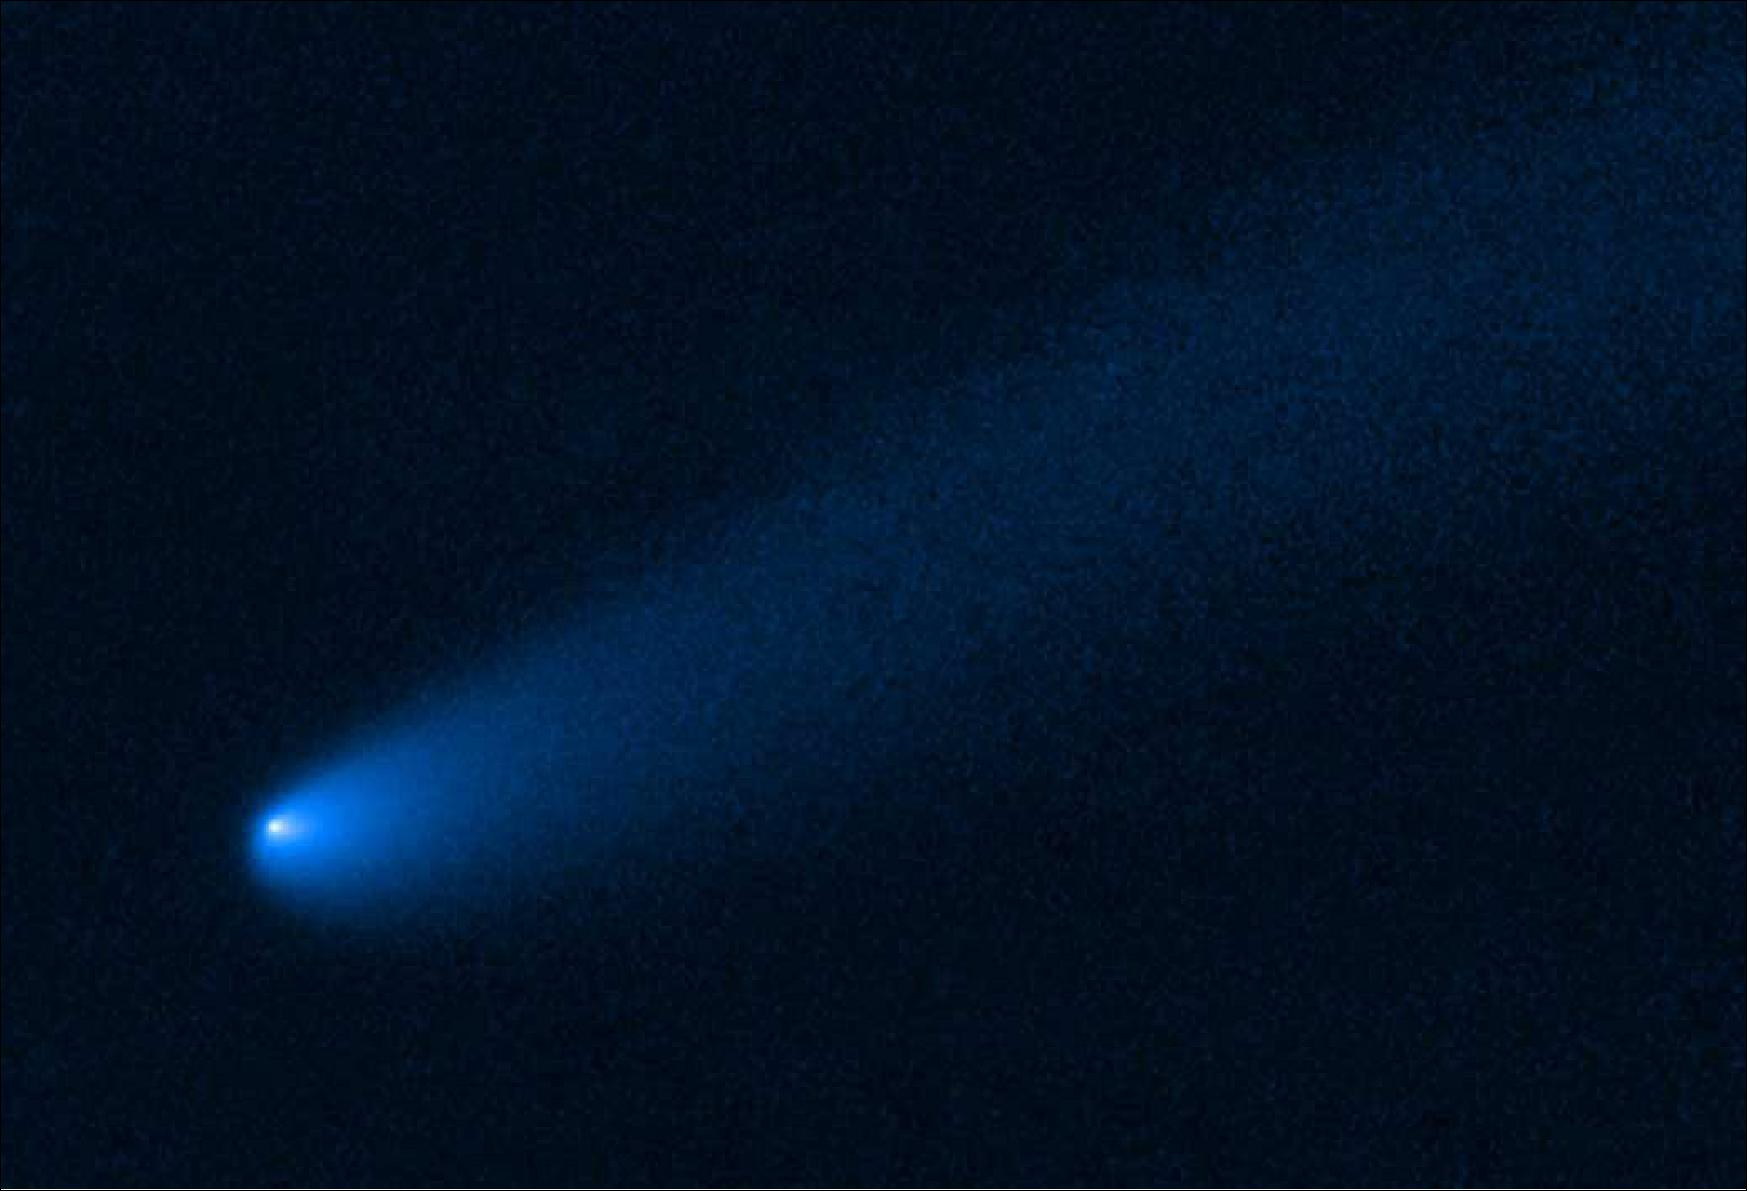 Figure 113: Hubble Trojan comet. NASA's Hubble Space Telescope snapped this image of the young comet P/2019 LD2 as it orbits near Jupiter's captured ancient asteroids, which are called Trojans. The Hubble view reveals a 400,000-mile-long tail of dust and gas flowing from the wayward comet's bright solid nucleus. This Hubble visible-light image is a combination of exposures taken April 1 and May 8, 2020, with the Wide Field Camera 3 (image credit: NASA/ESA/J. Olmsted/STScI)